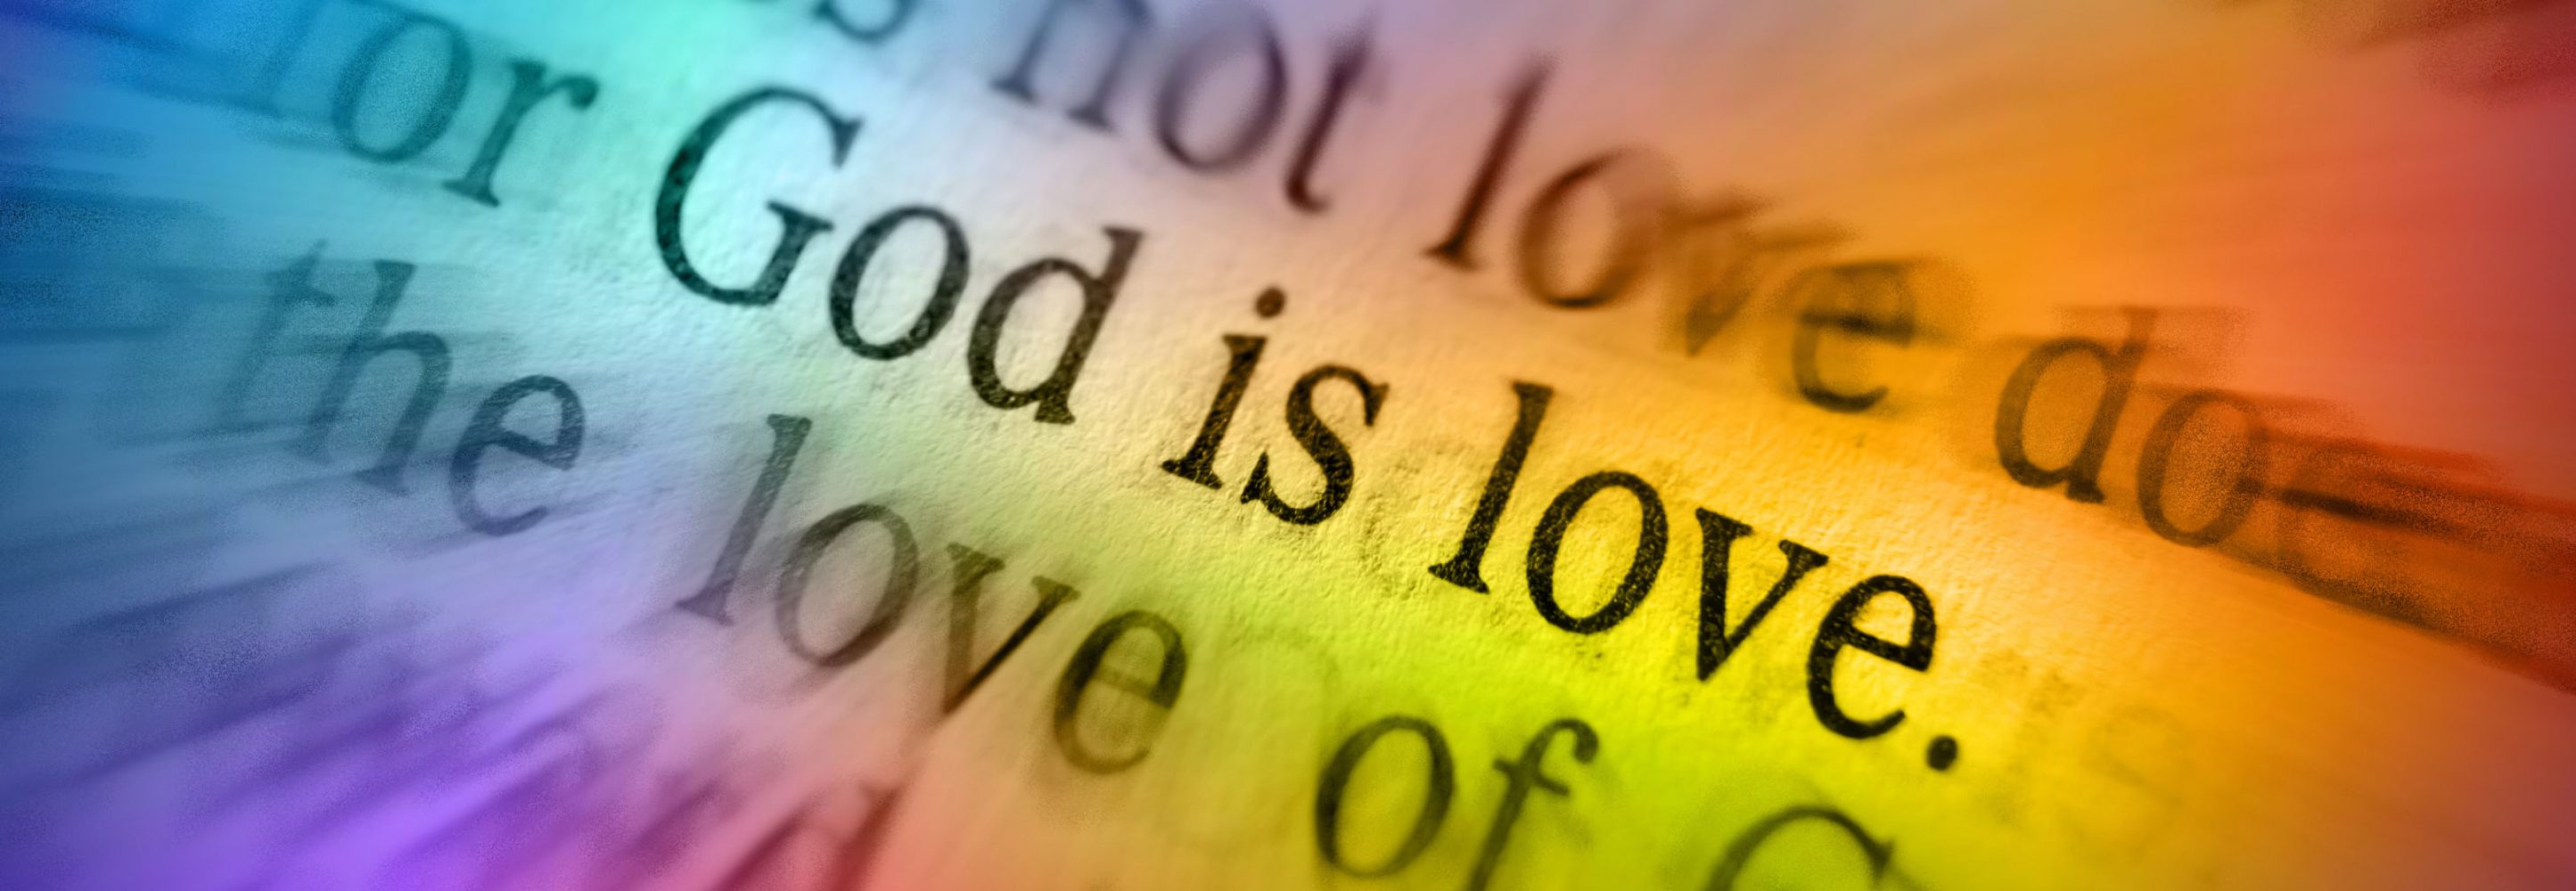 GOD IS LOVE
Bible text from 1 John 4:8, the Bible. Visual effects to emphasize the message. Macro